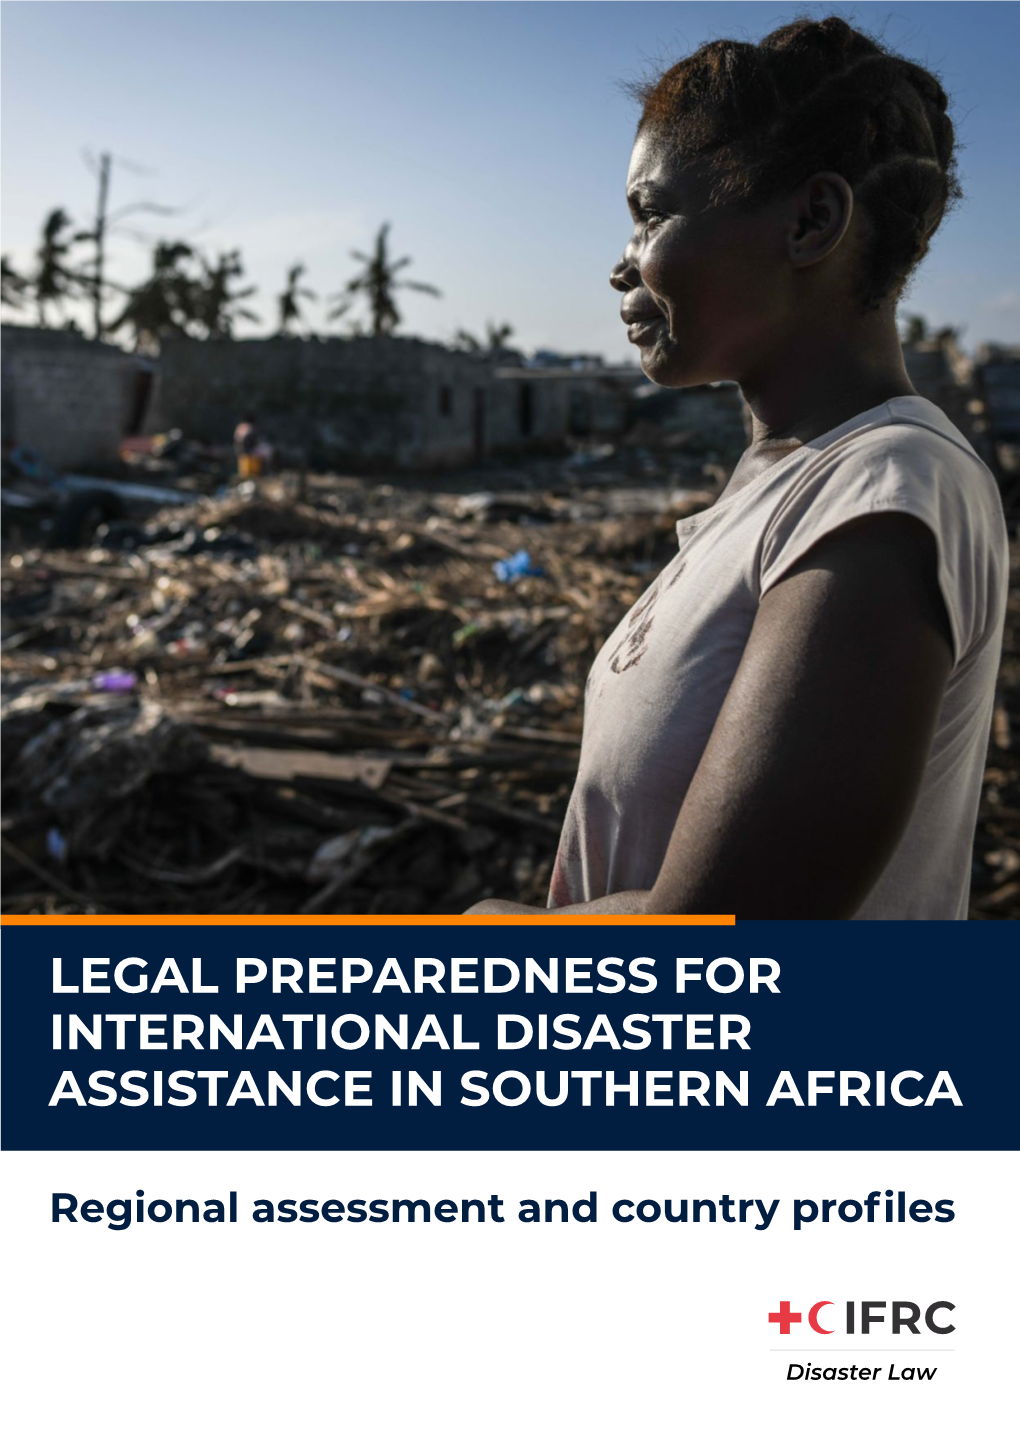 Legal Preparedness for International Disaster Assistance in Southern Africa